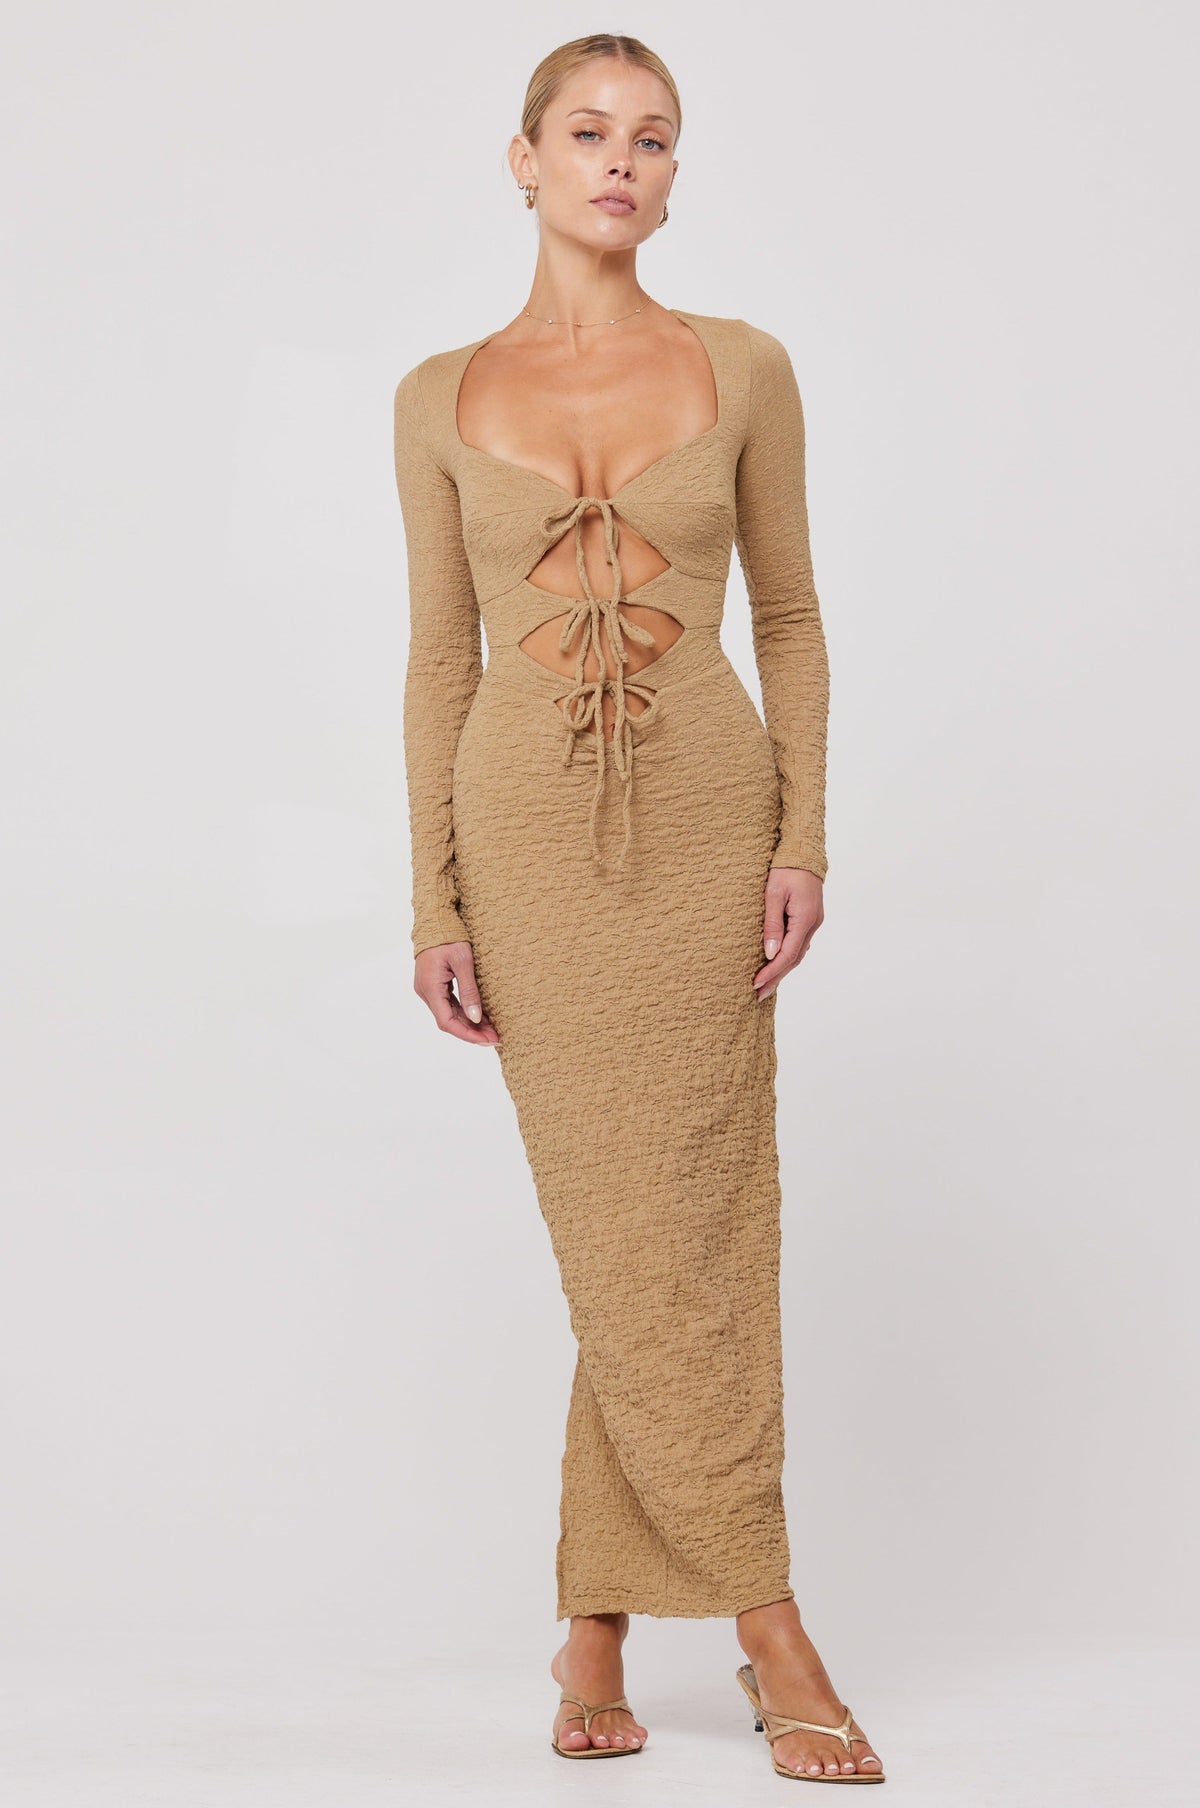 This is an image of Simone Dress in Moss - RESA featuring a model wearing the dress